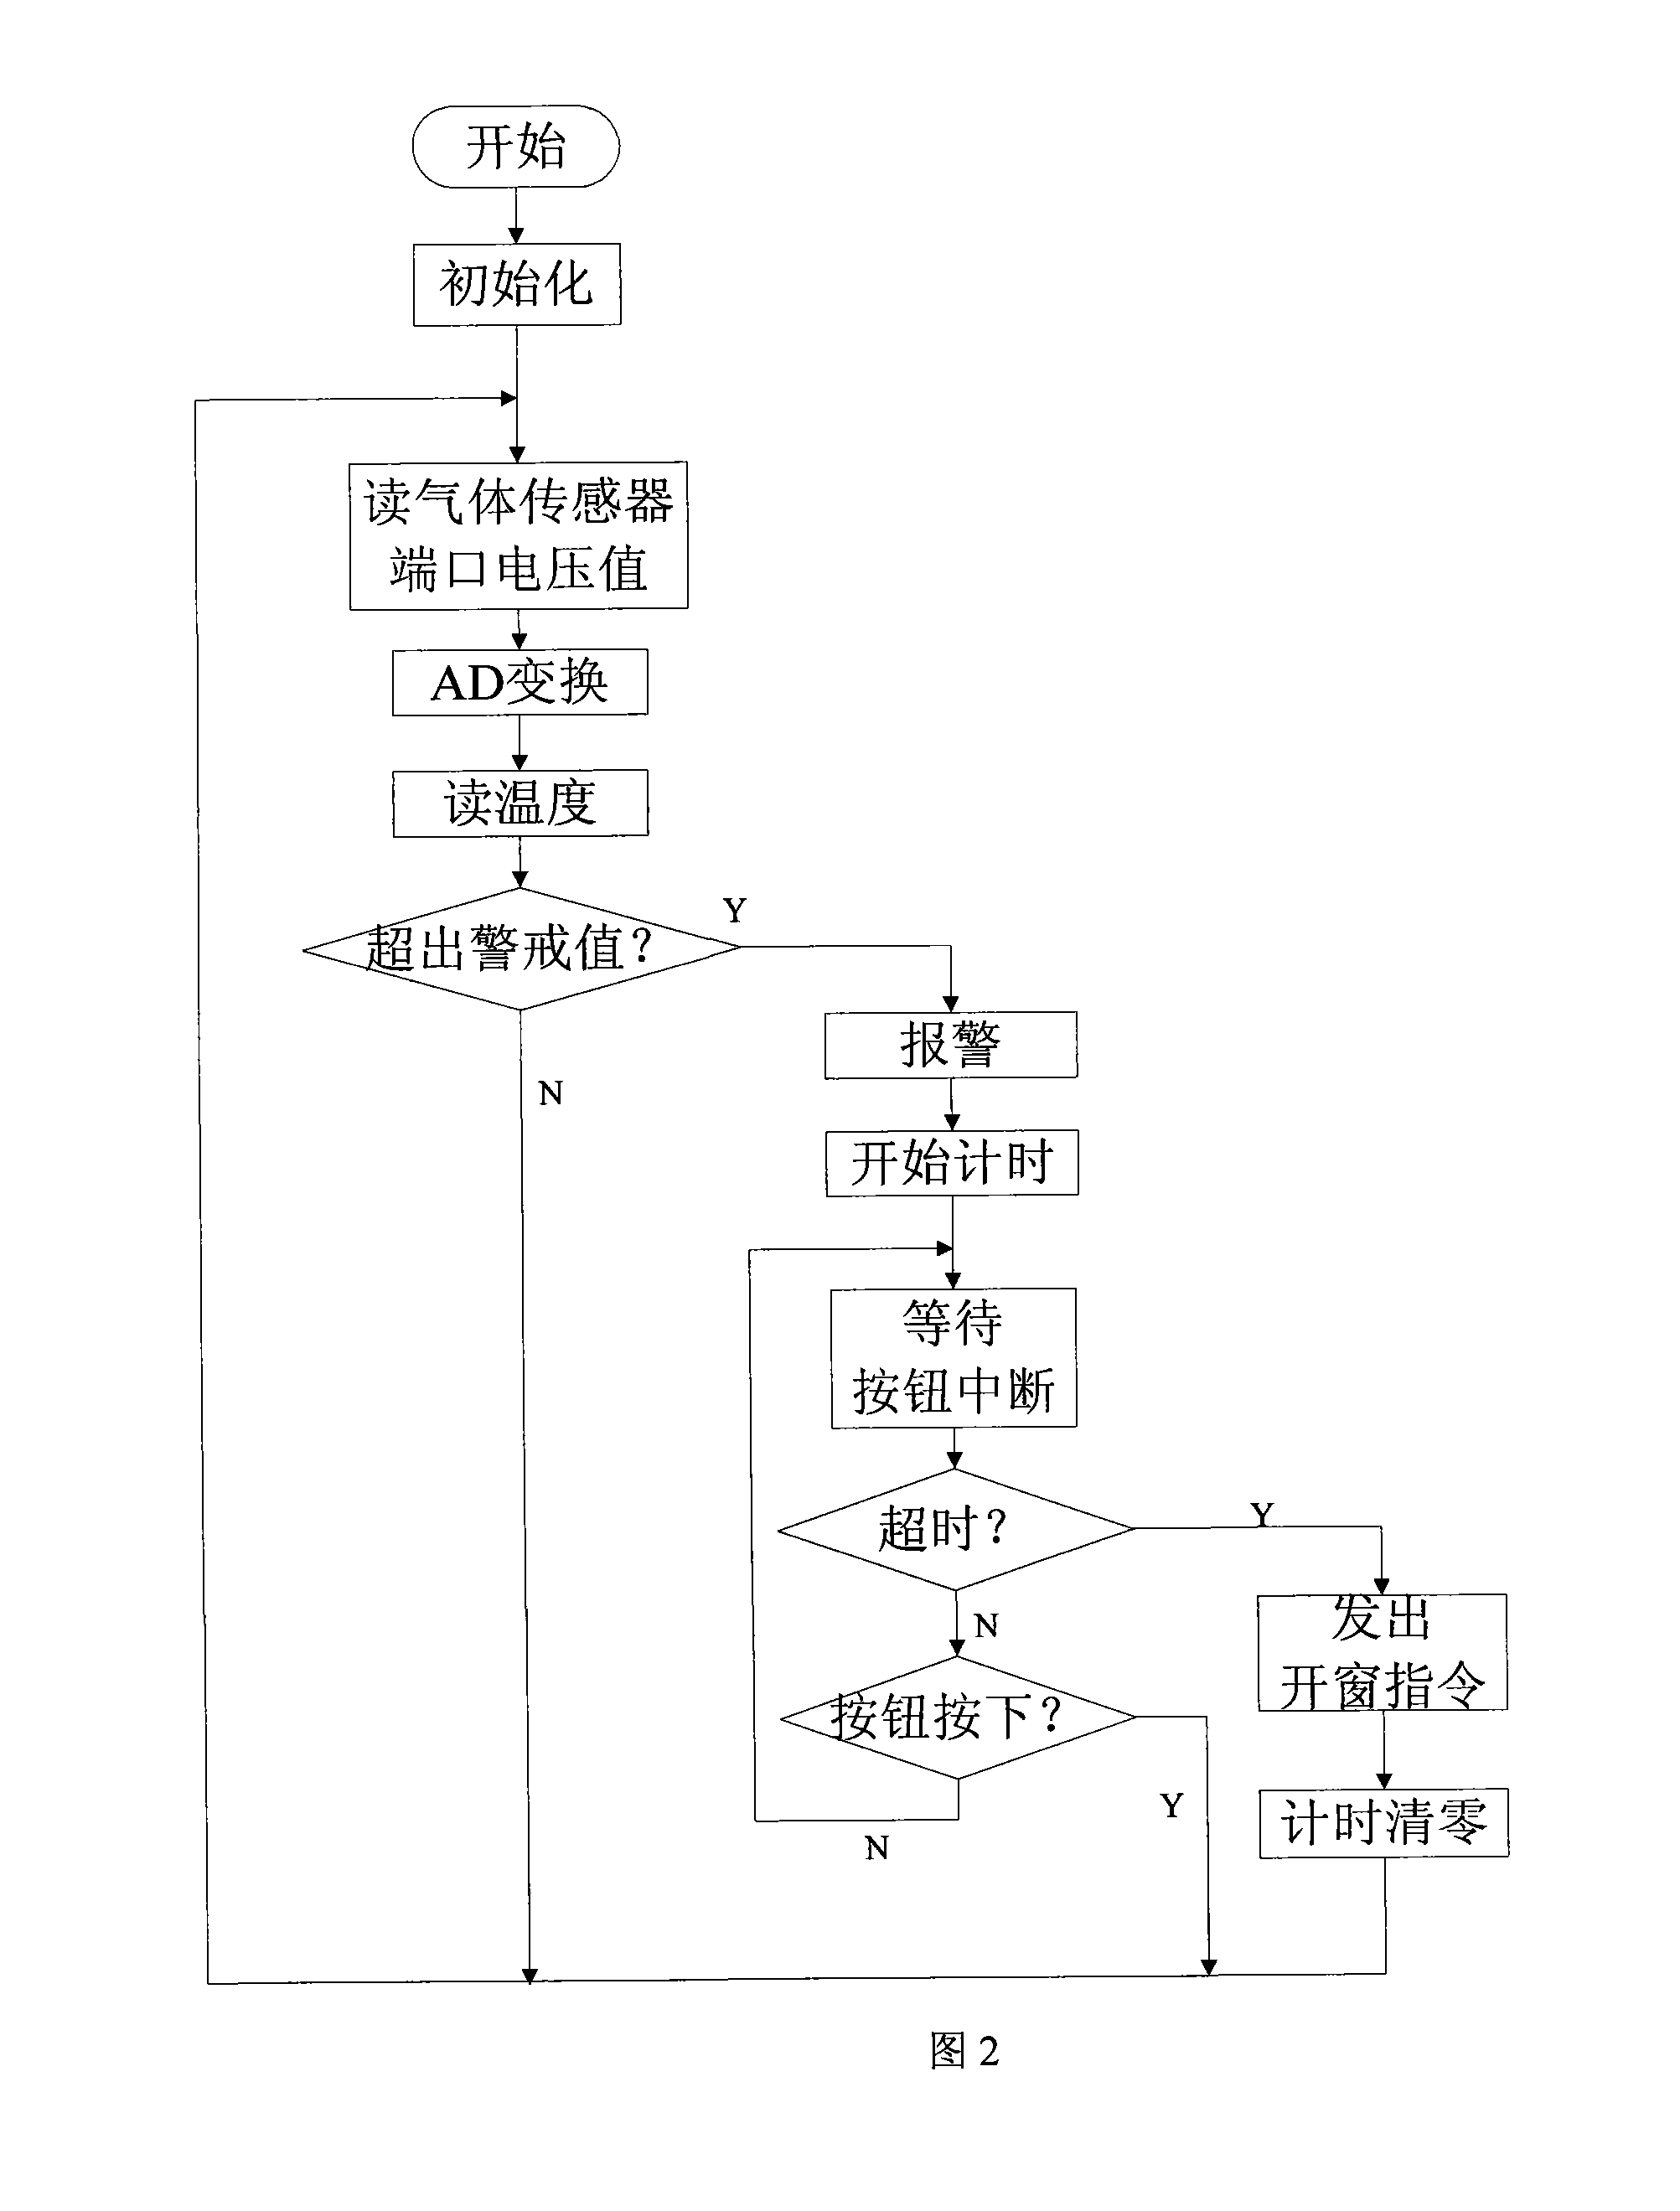 System for monitoring vehicle surroundings